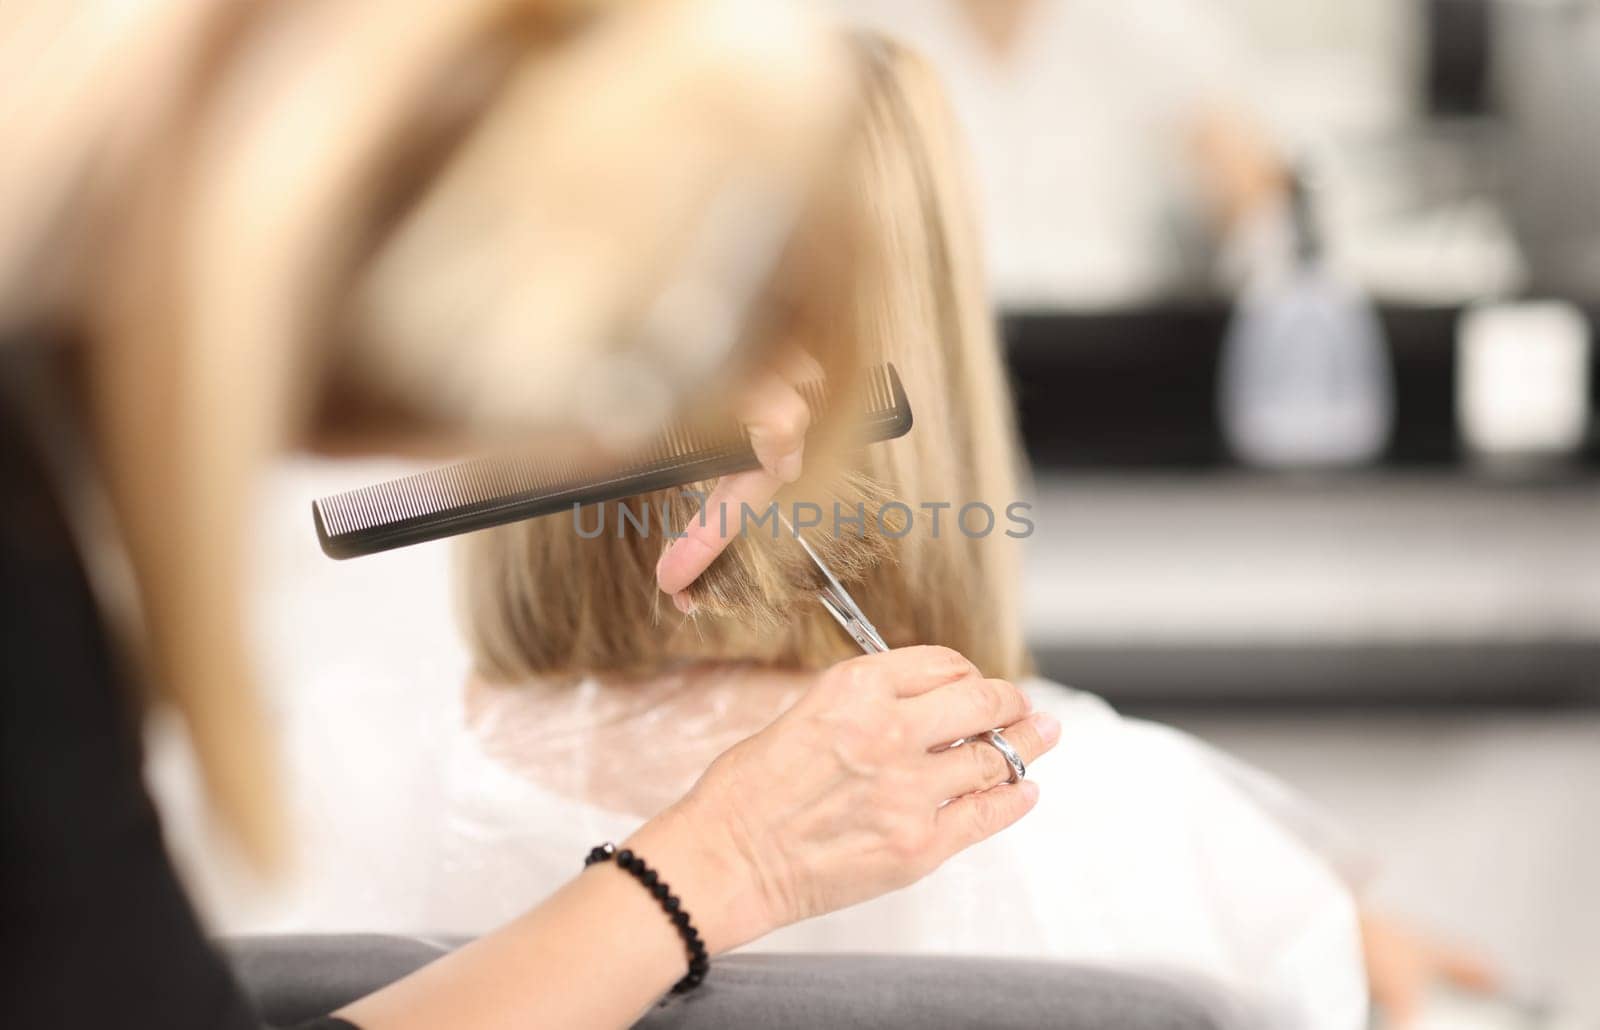 Hairdresser holds comb and scissors in his hands and cuts client's hair. Beauty salon services concept